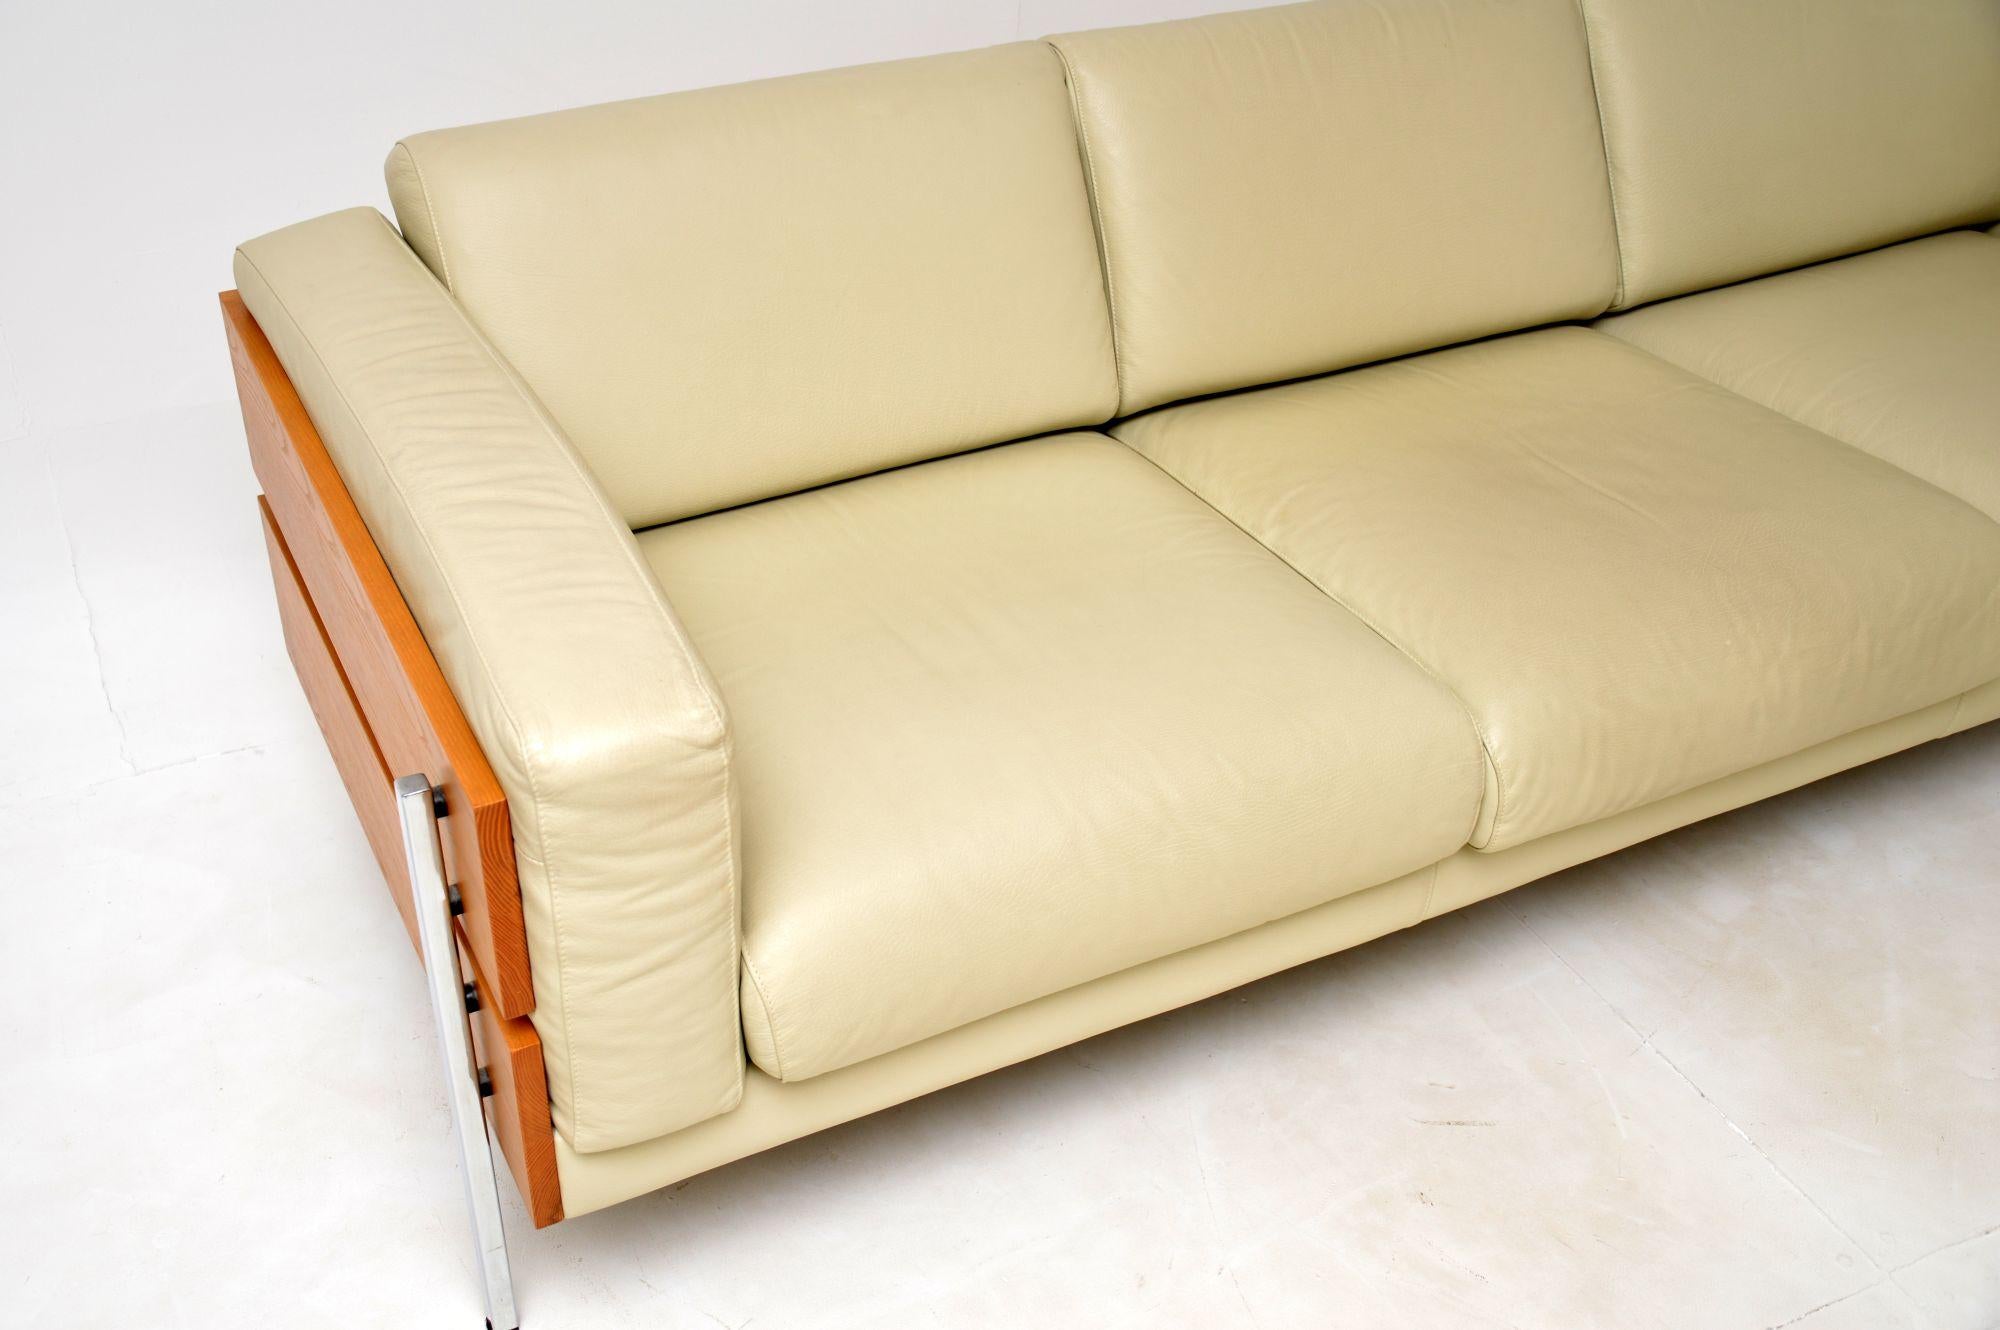 20th Century Vintage Leather Forum Sofa by Robin Day for Habitat